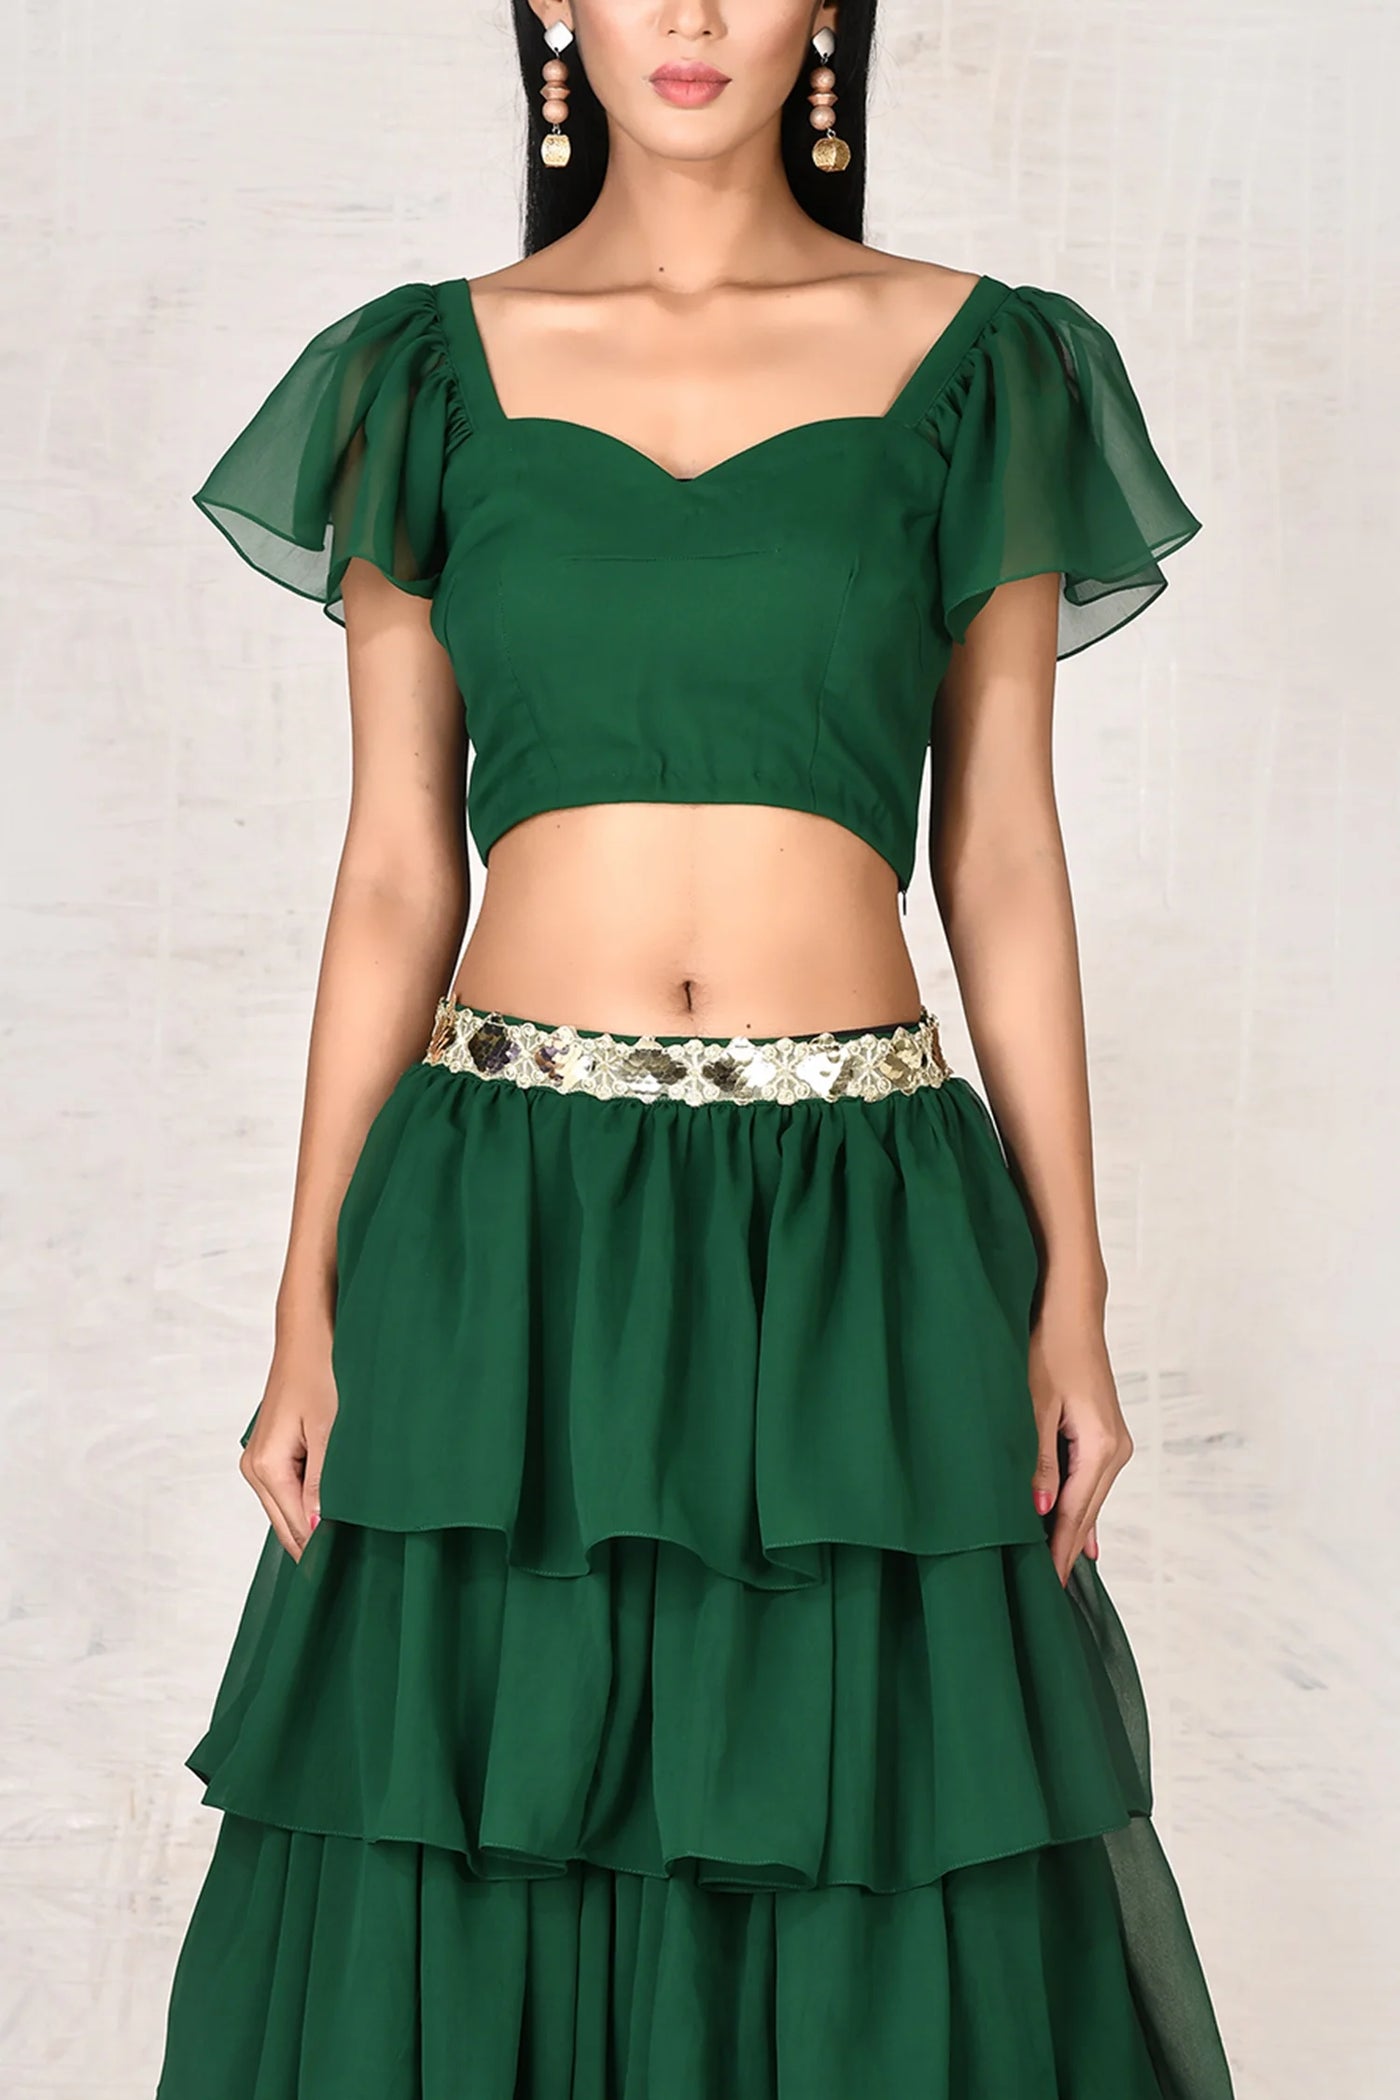 Green Crop Top Skirt Set Indian Clothing in Denver, CO, Aurora, CO, Boulder, CO, Fort Collins, CO, Colorado Springs, CO, Parker, CO, Highlands Ranch, CO, Cherry Creek, CO, Centennial, CO, and Longmont, CO. NATIONWIDE SHIPPING USA- India Fashion X